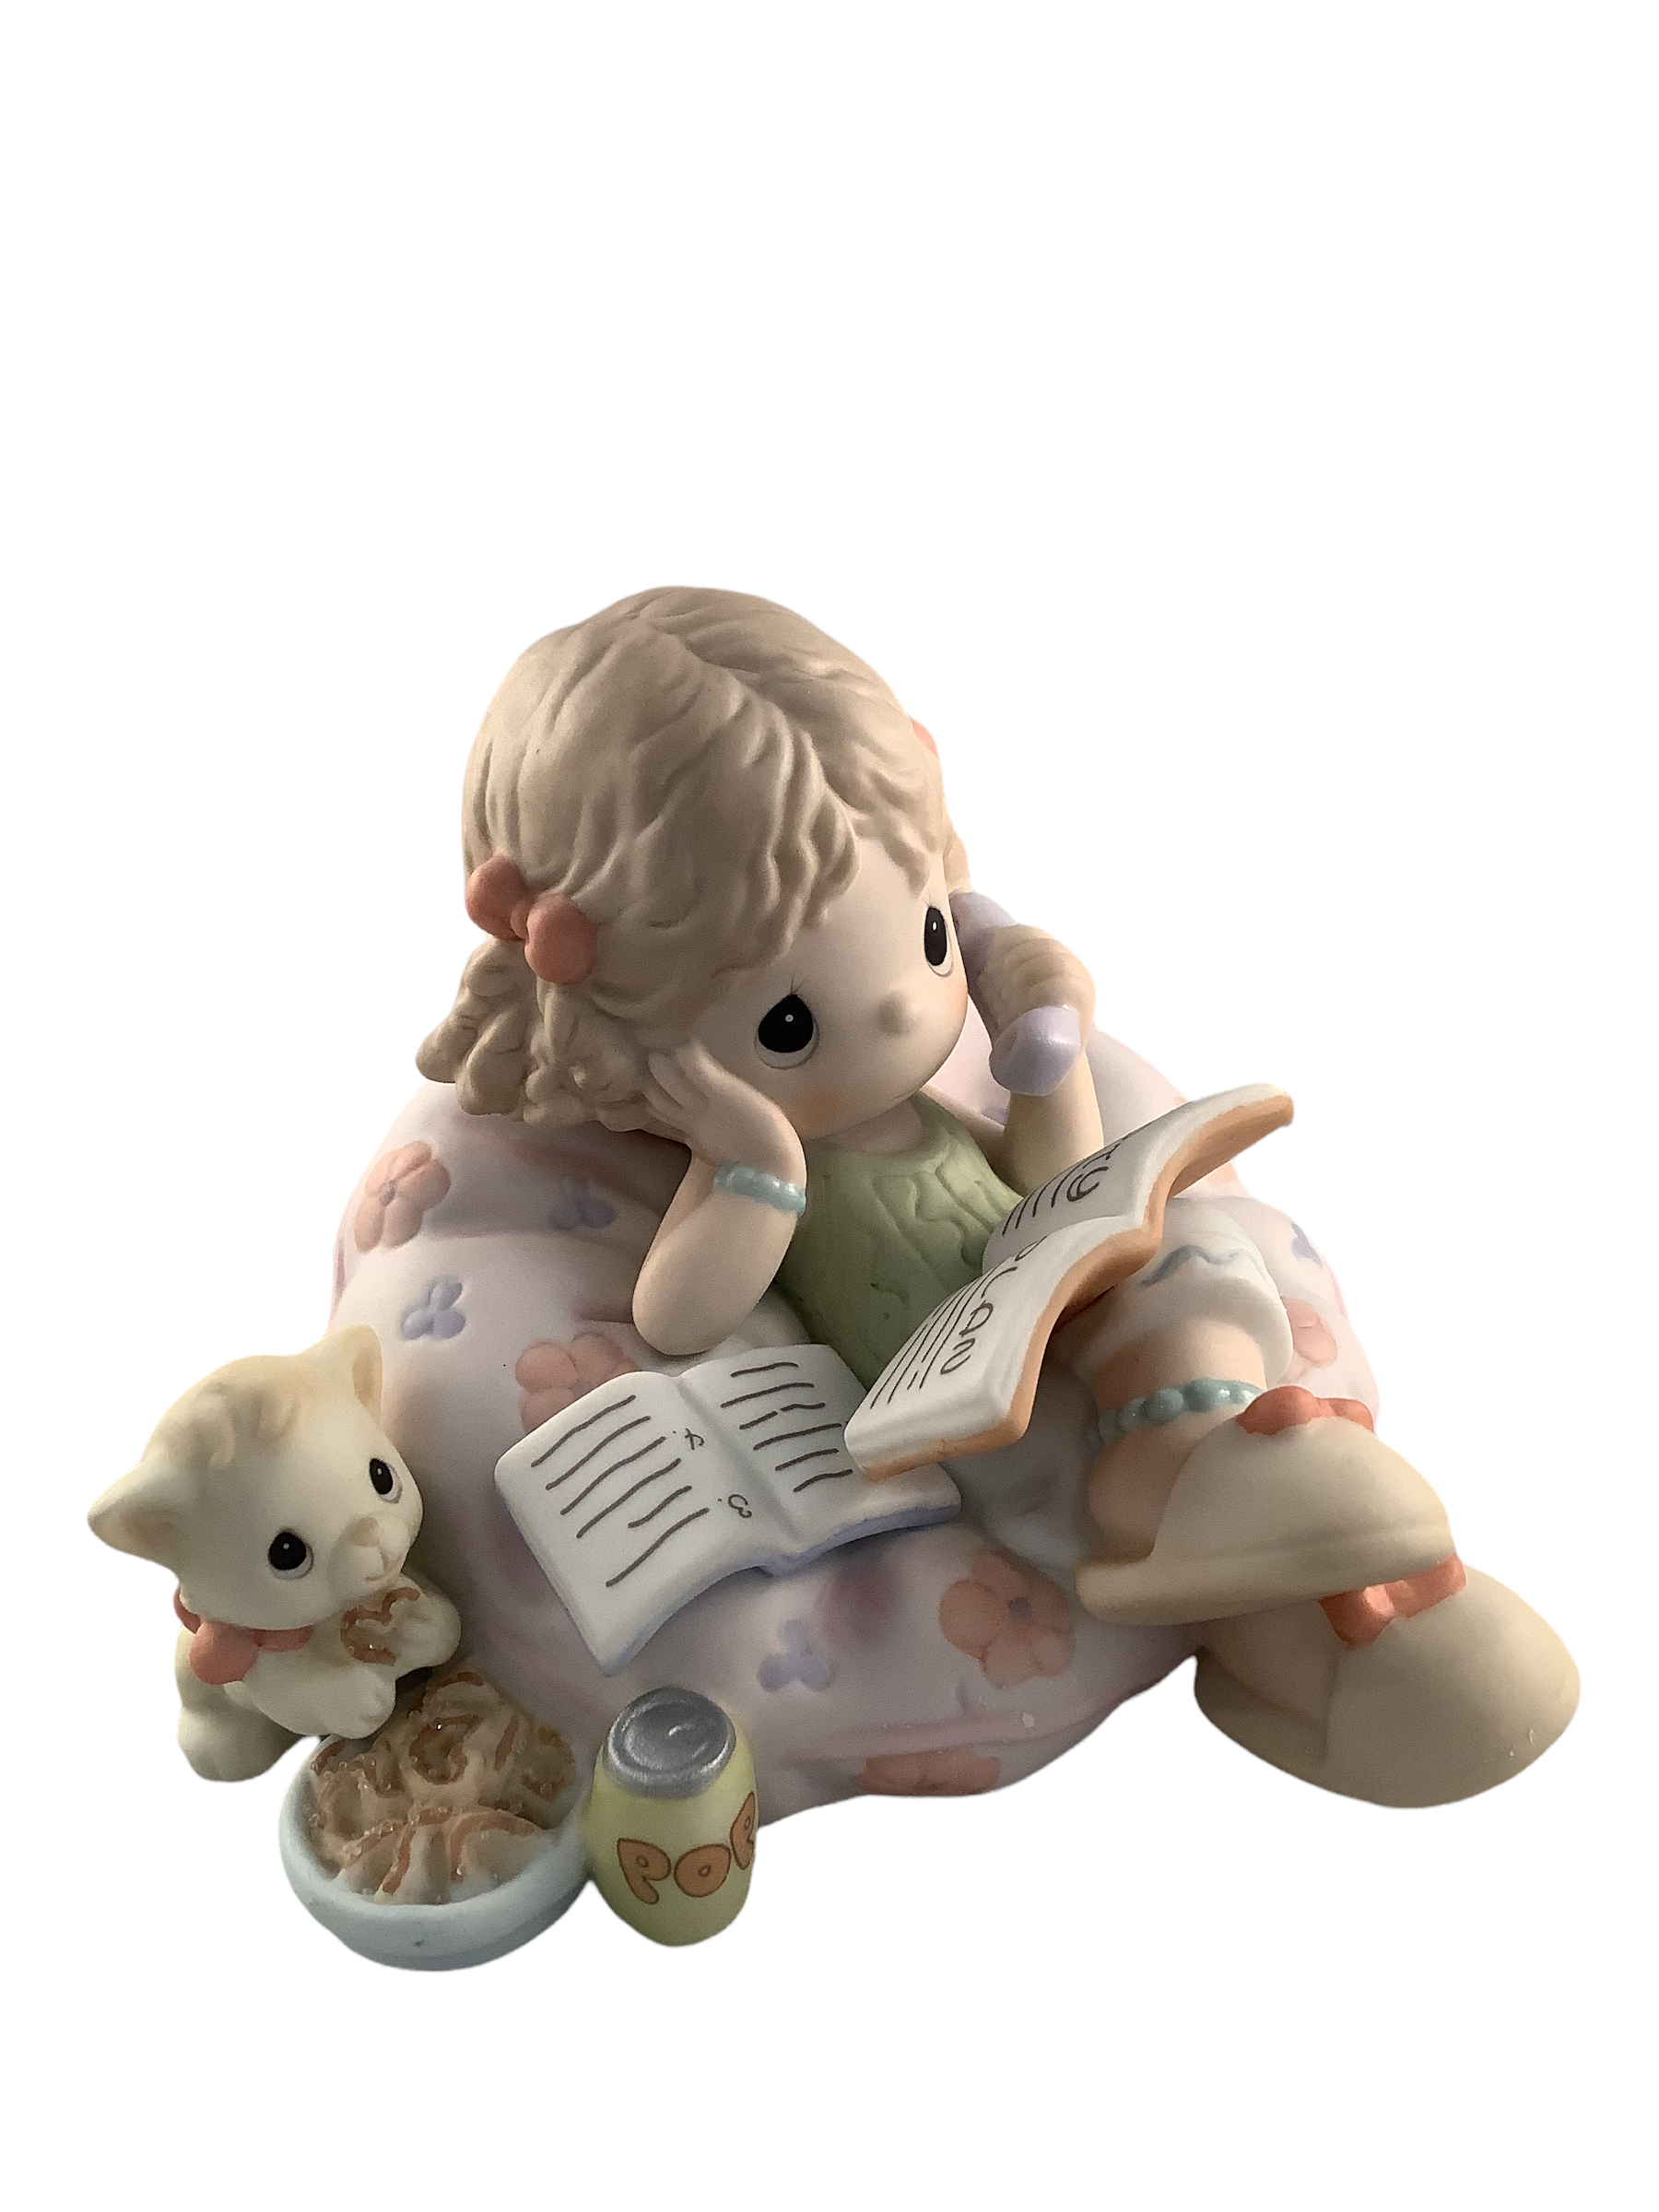 Calling All My Party Girls - Precious Moment Figurine